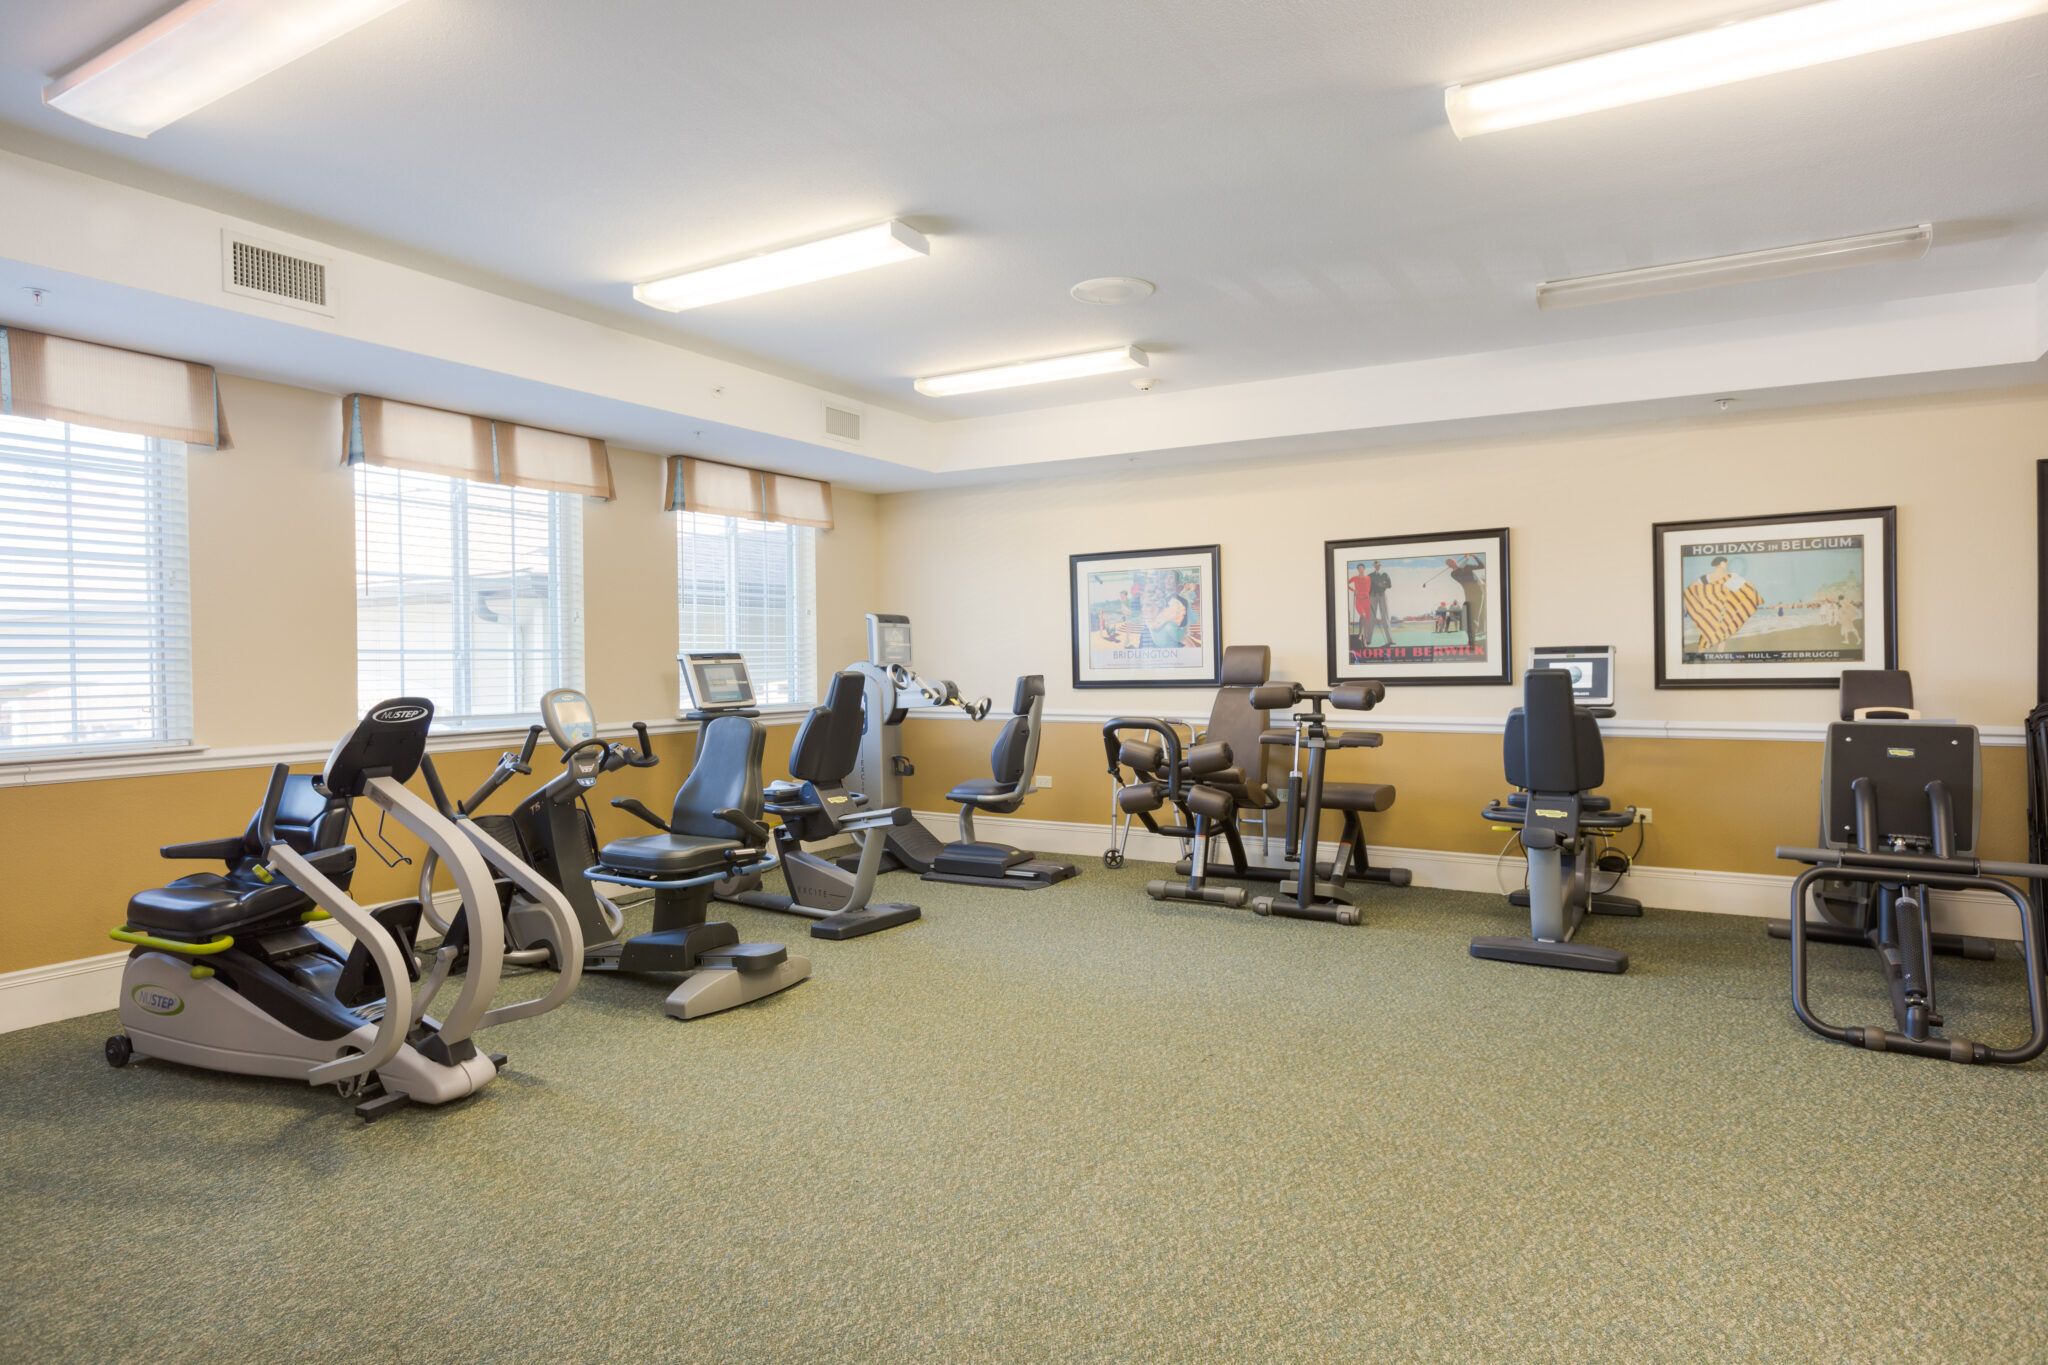 Senior resident at Three Oaks Assisted Living working out in gym with modern equipment, surrounded by art.